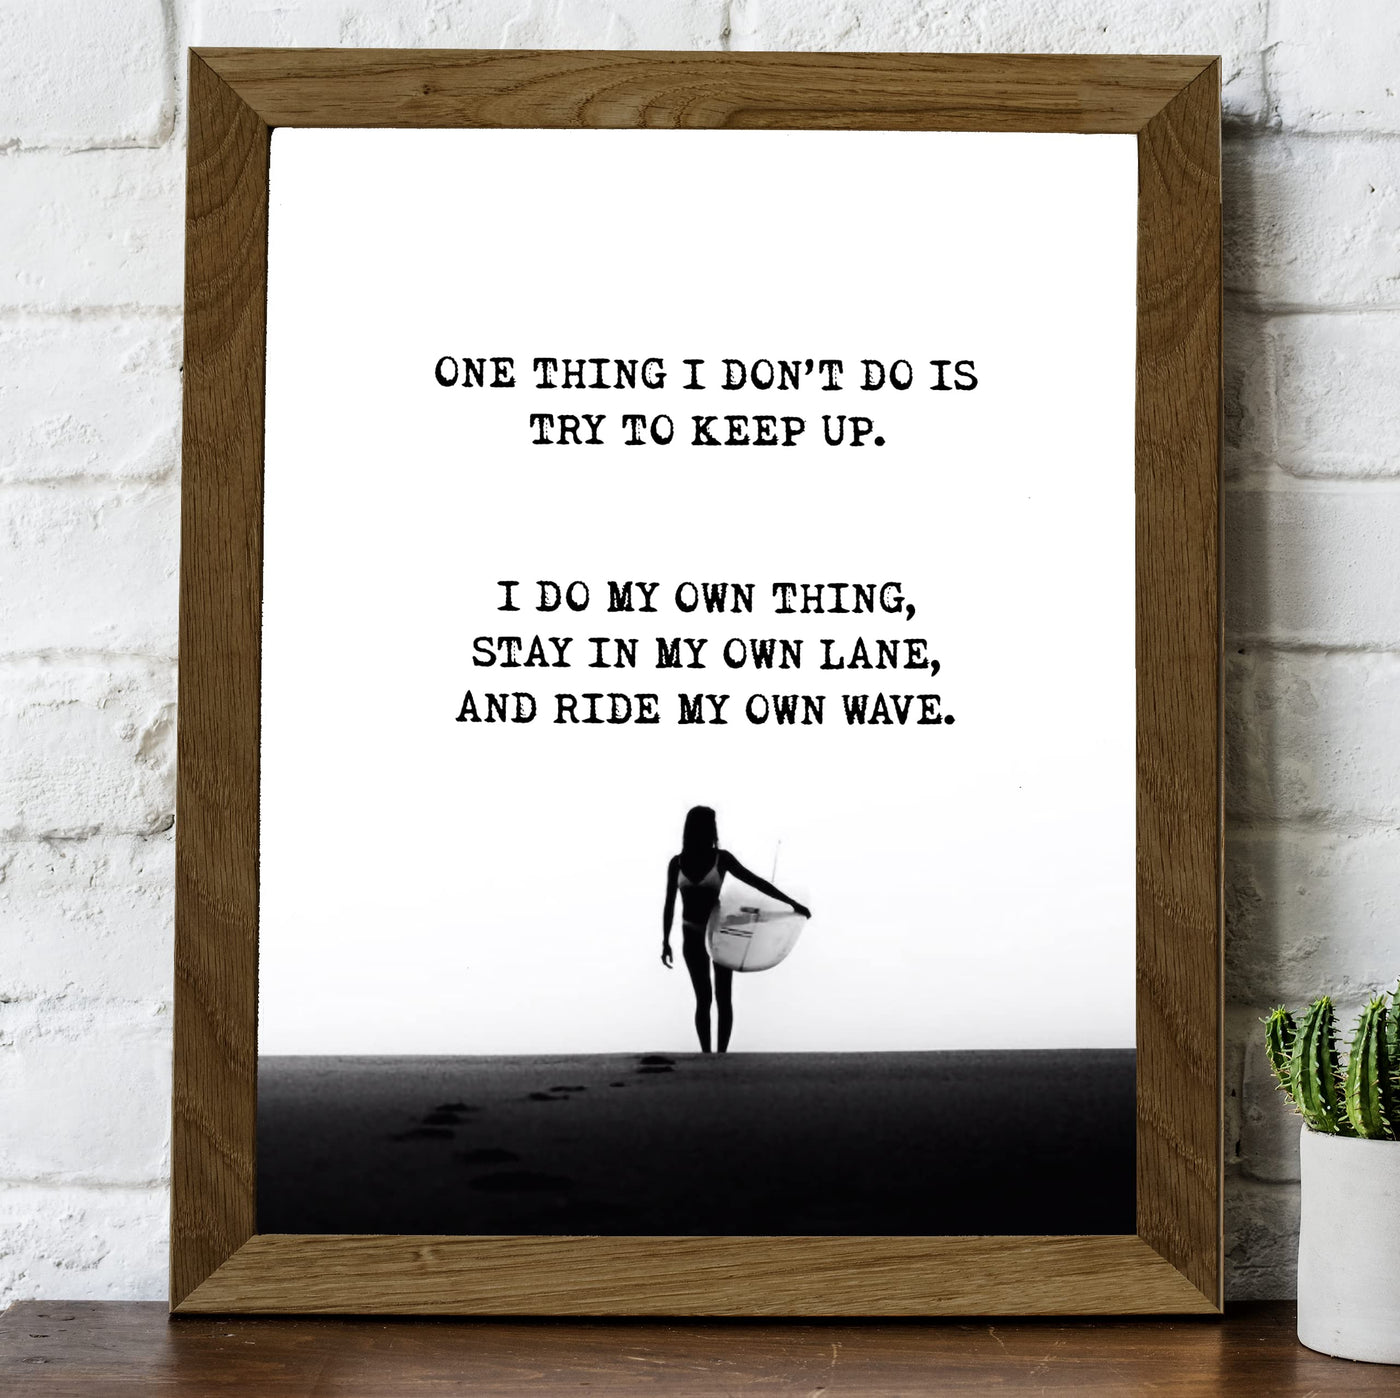 I Do My Own Thing- Ride My Own Wave-Surfer Girl on the Beach -Inspirational Wall Art Print -8 x 10"-Ready to Frame. Retro Home-Office-Beach House Decor. Perfect for Beach, Ocean and Surfing Themes!